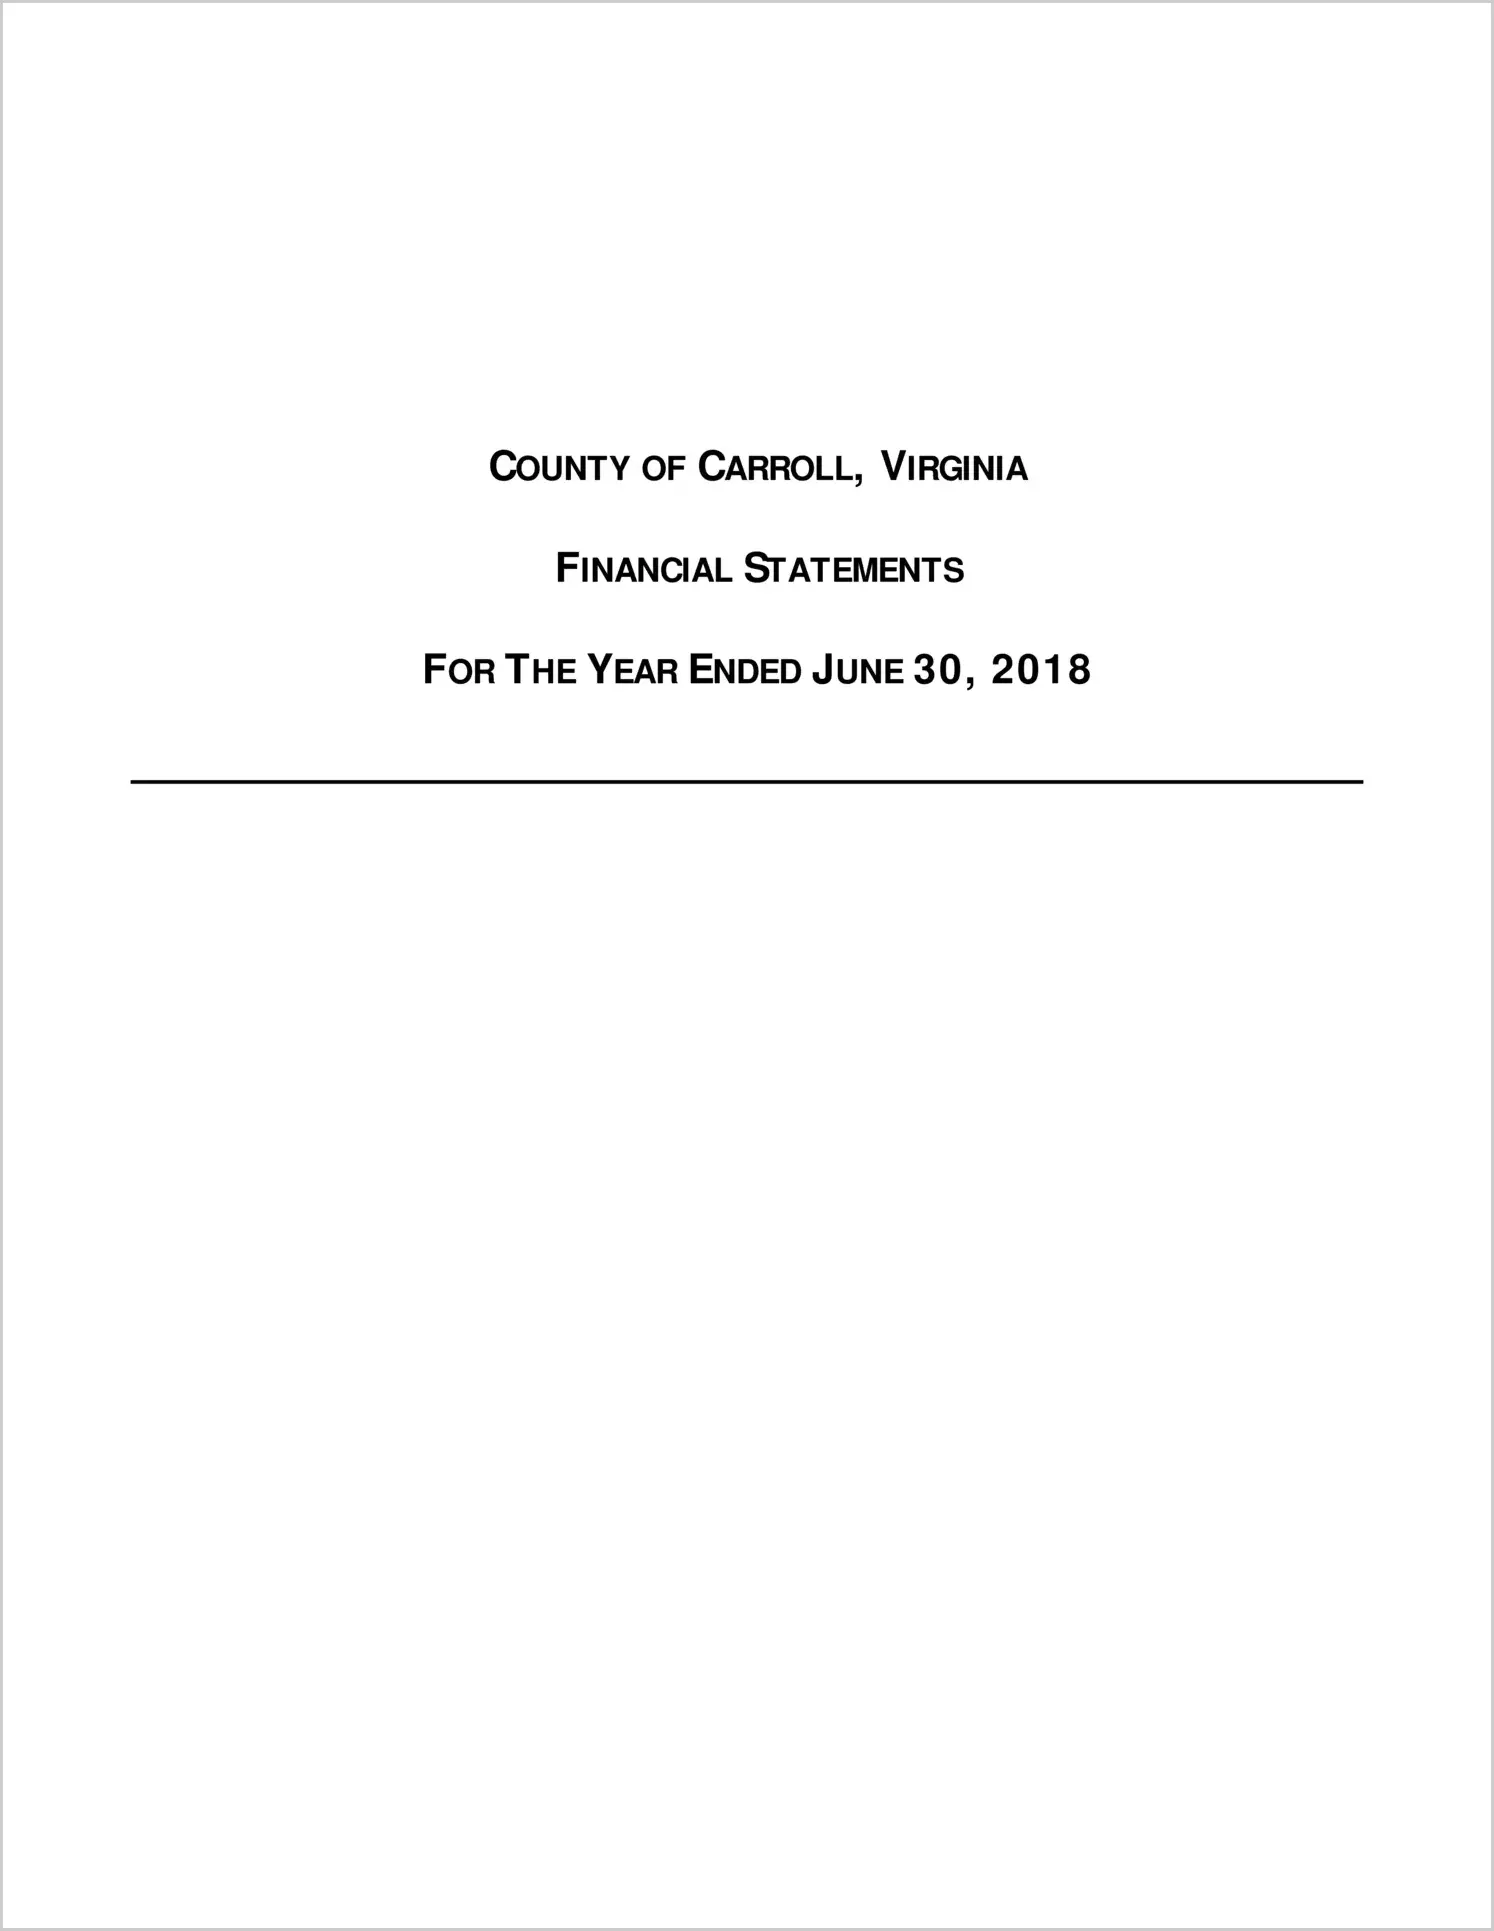 2018 Annual Financial Report for County of Carroll